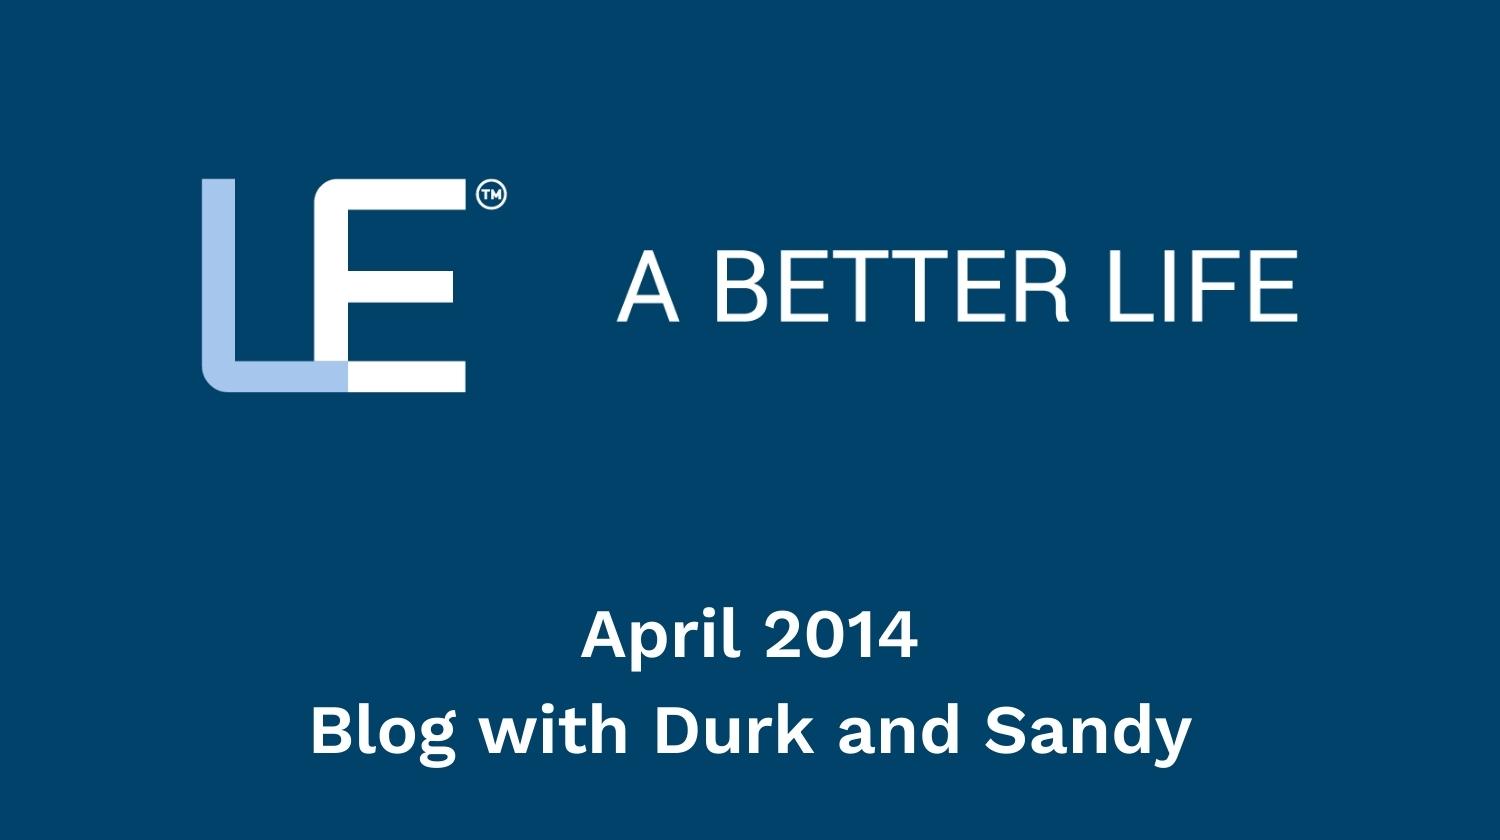 April 2014 Blog with Durk and Sandy